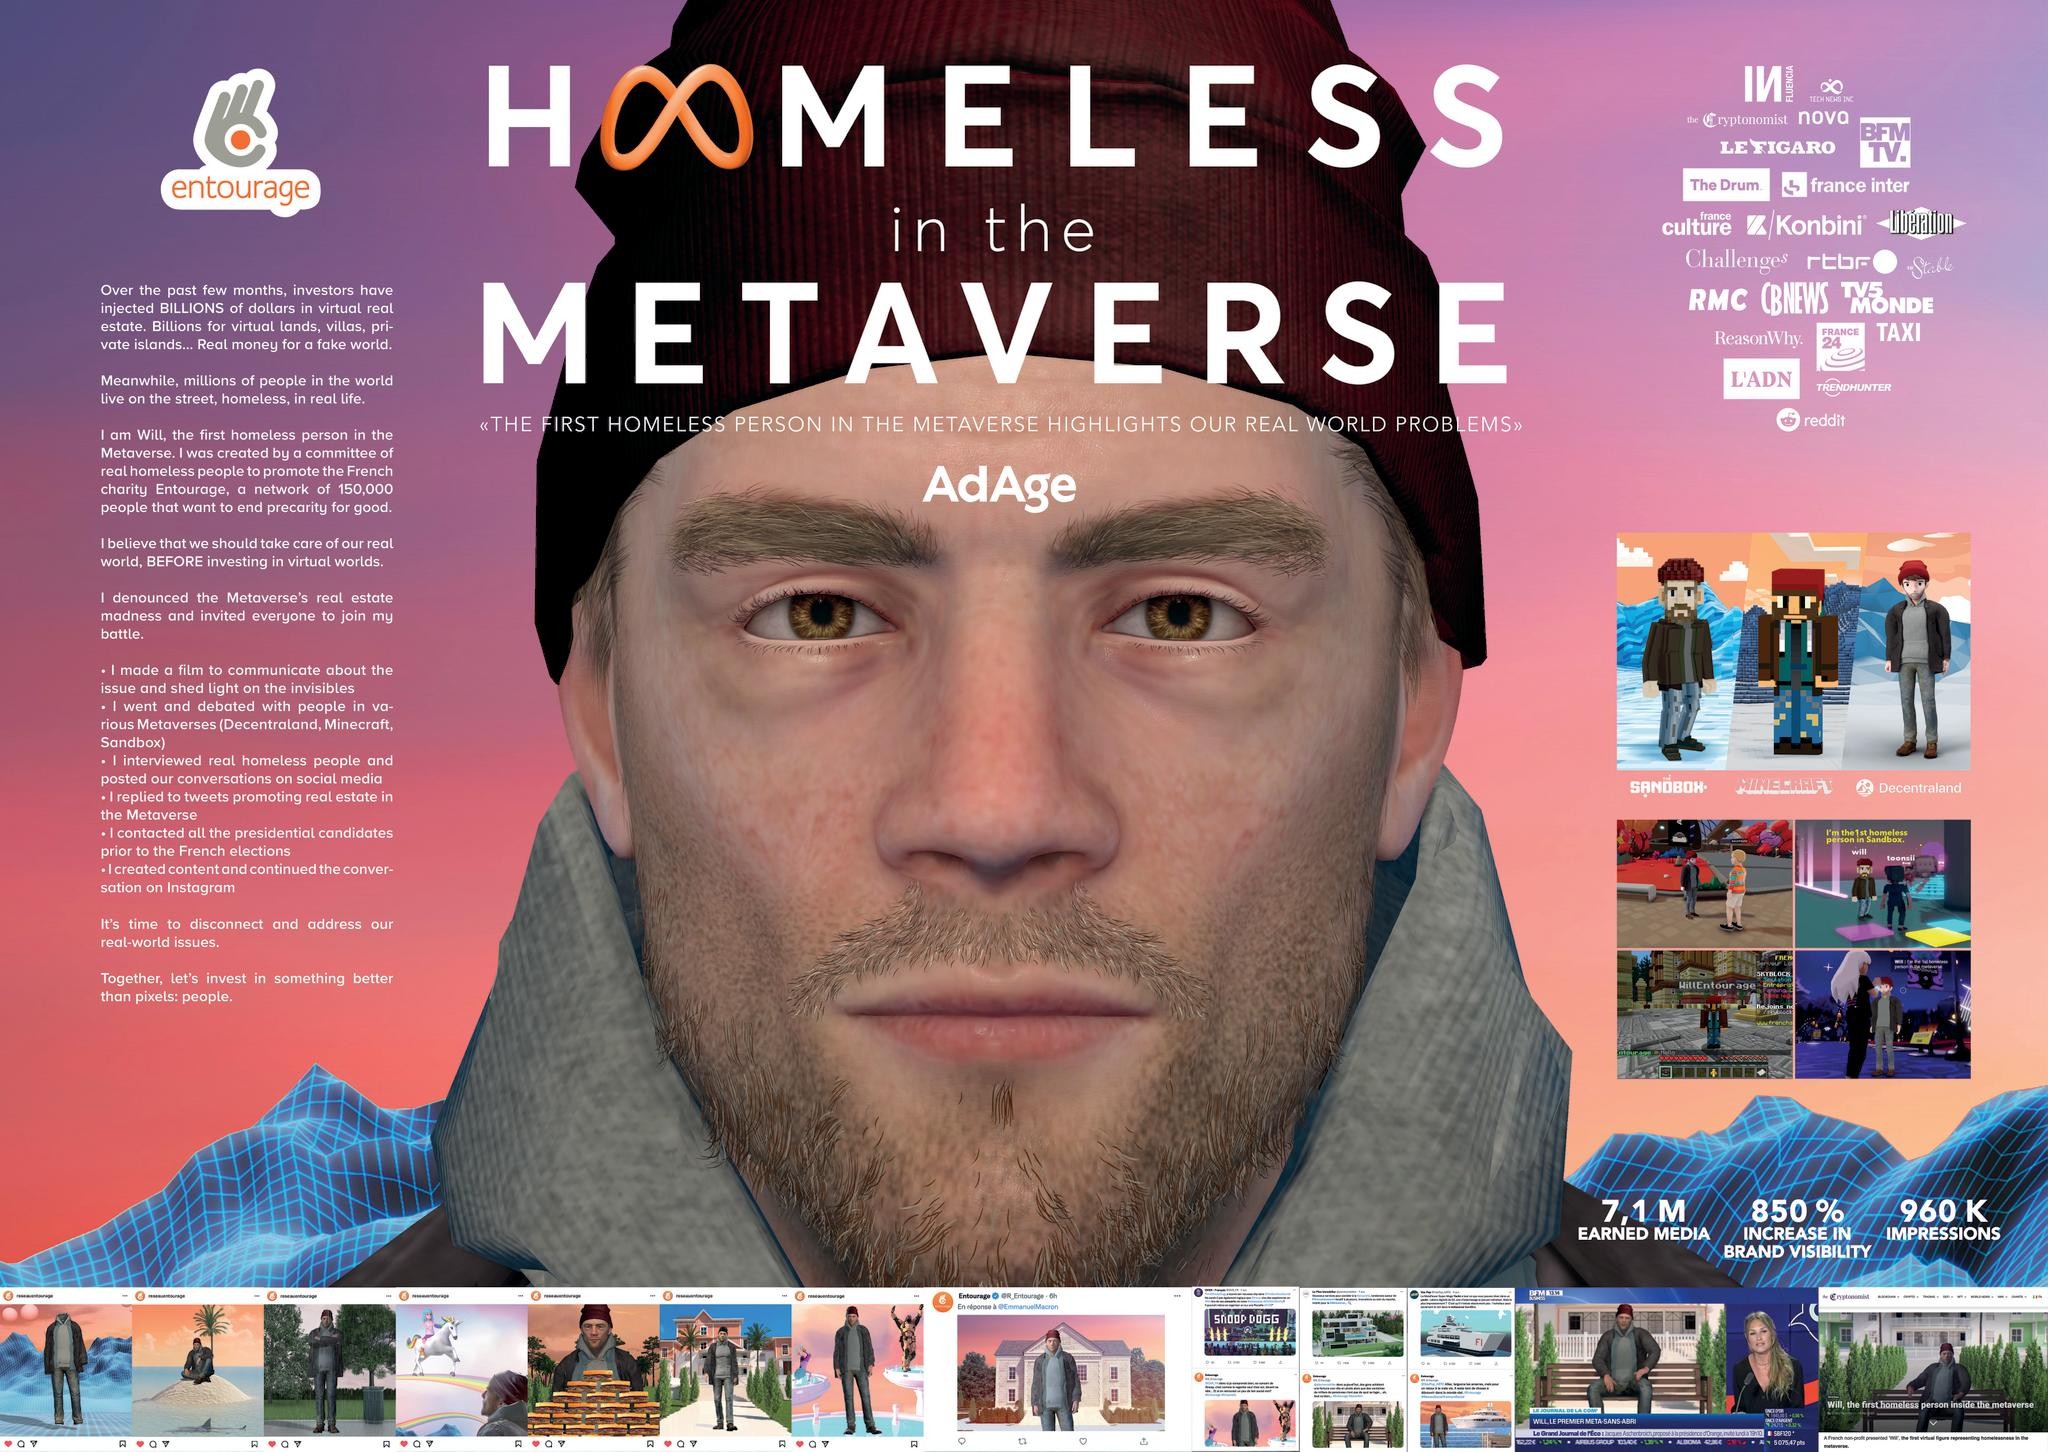 HOMELESS IN THE METAVERSE